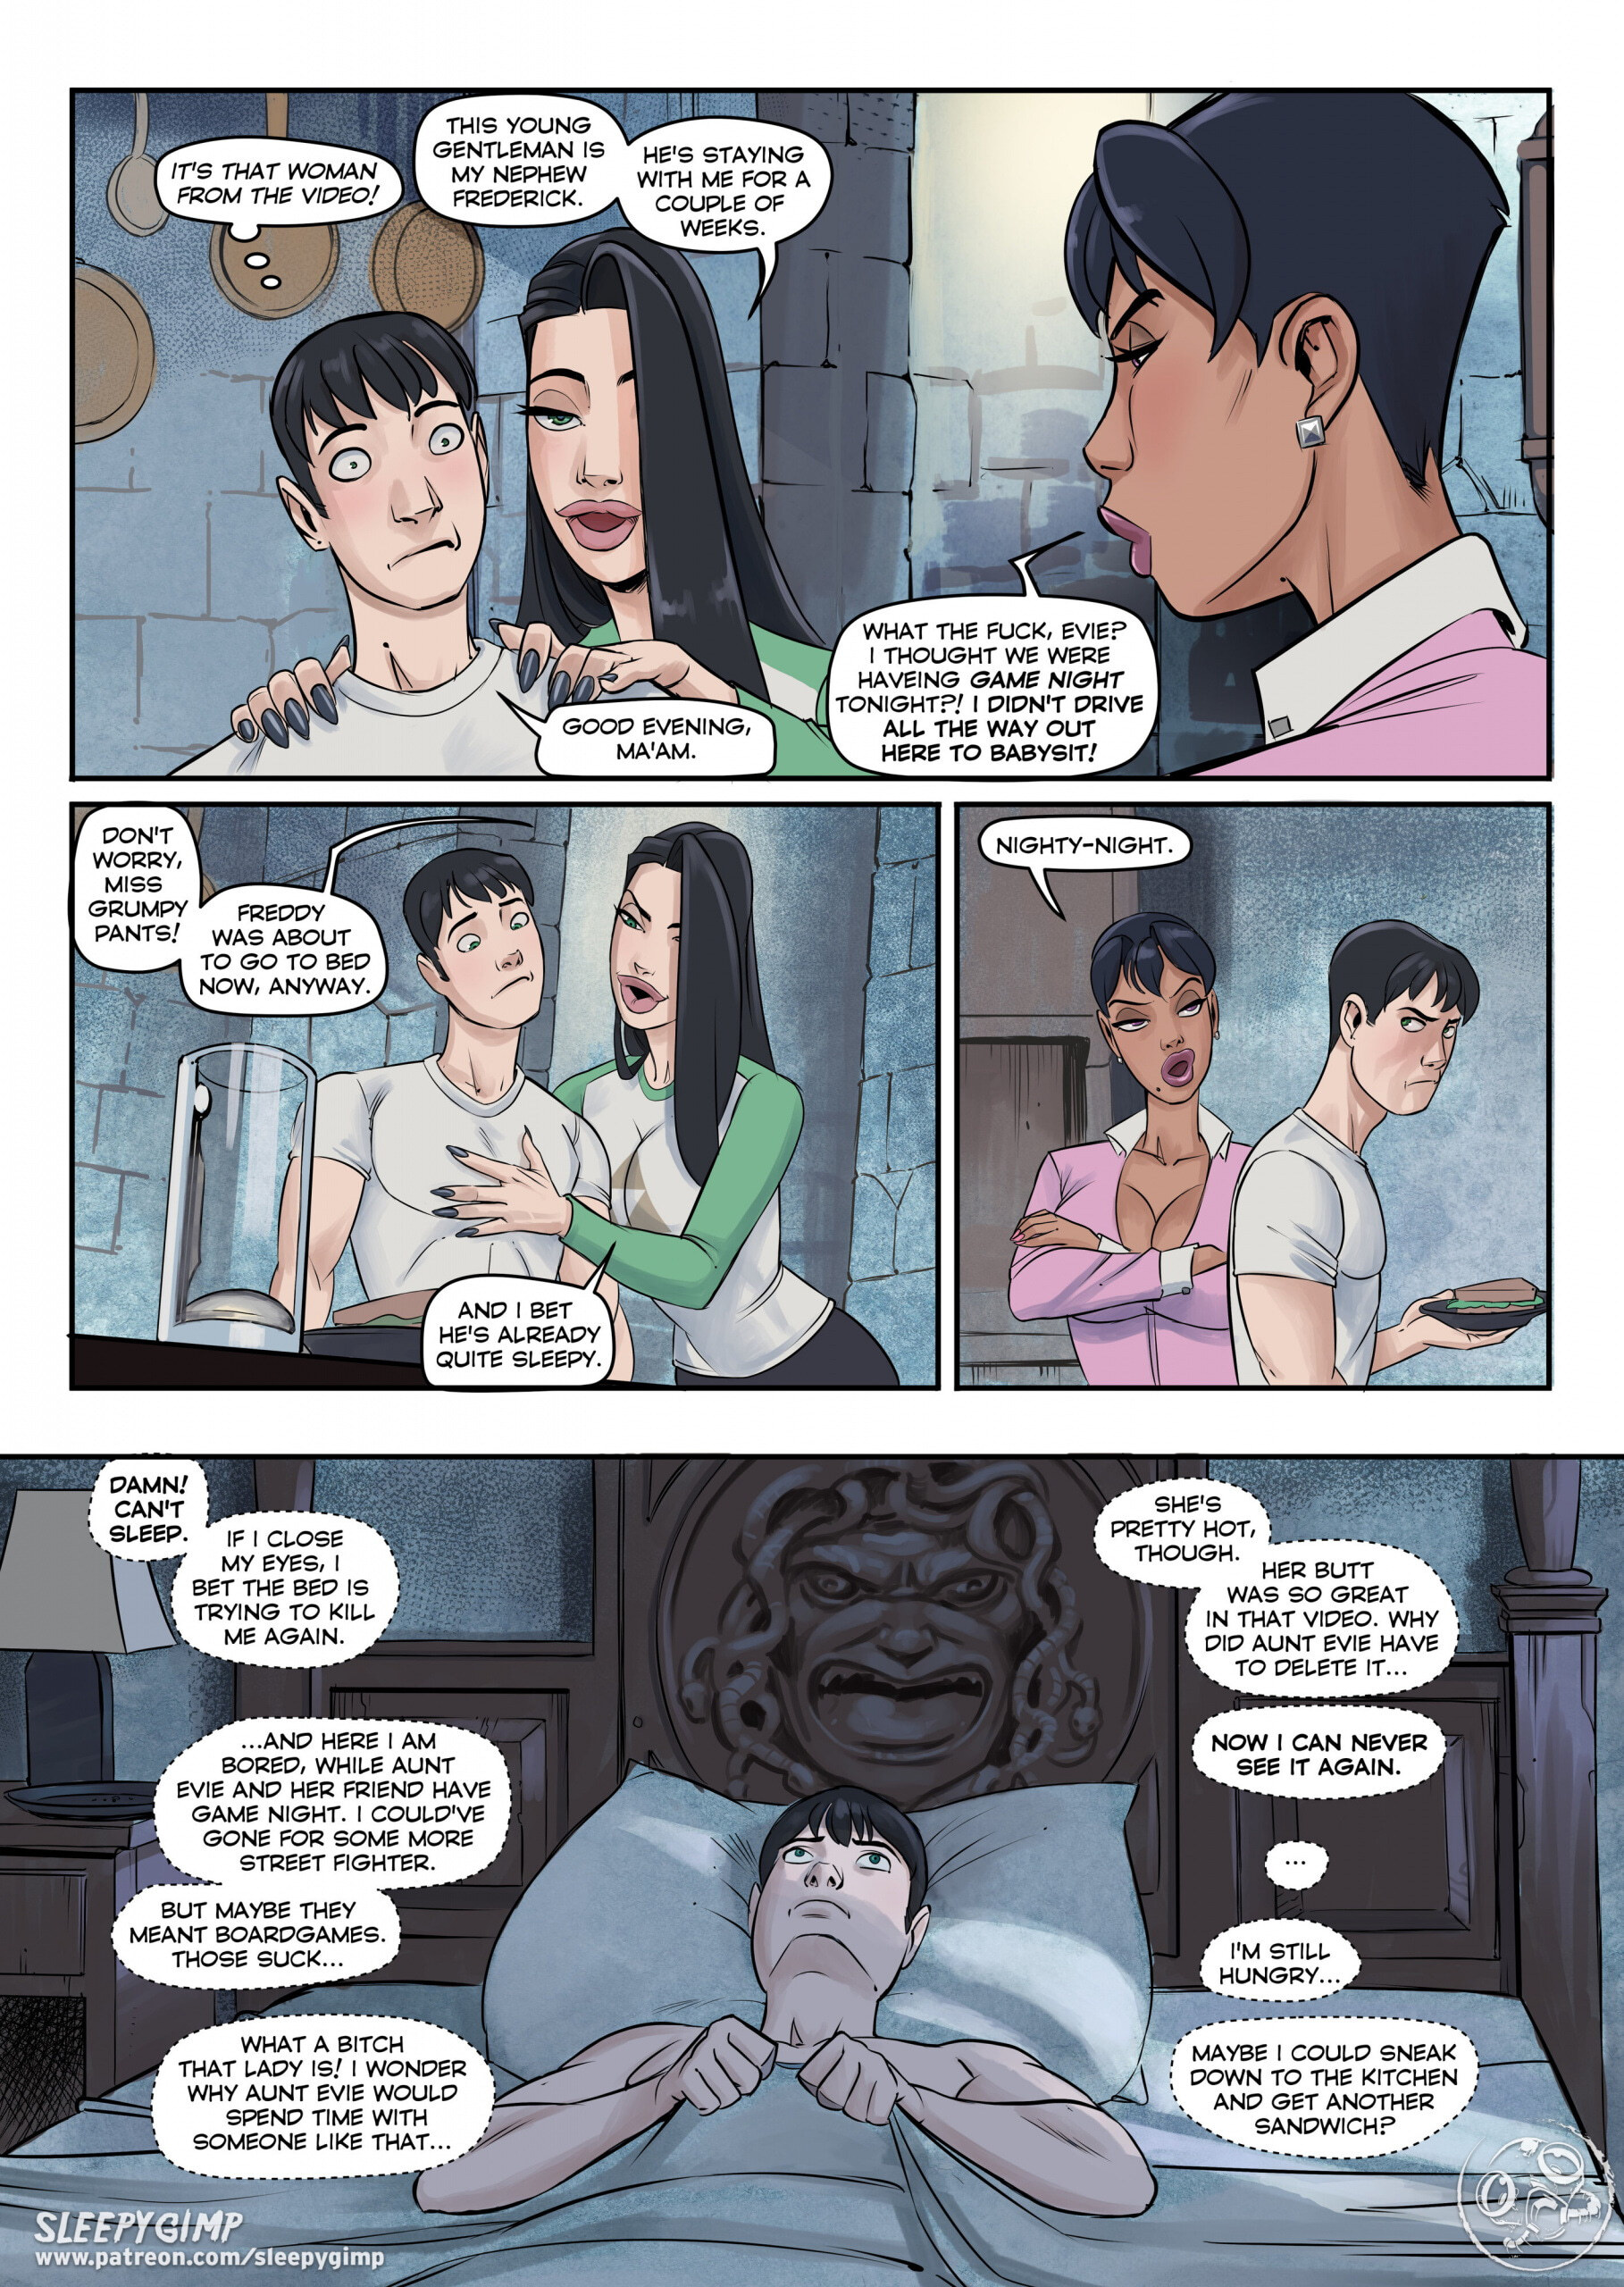 Family Values 2 - Page 11